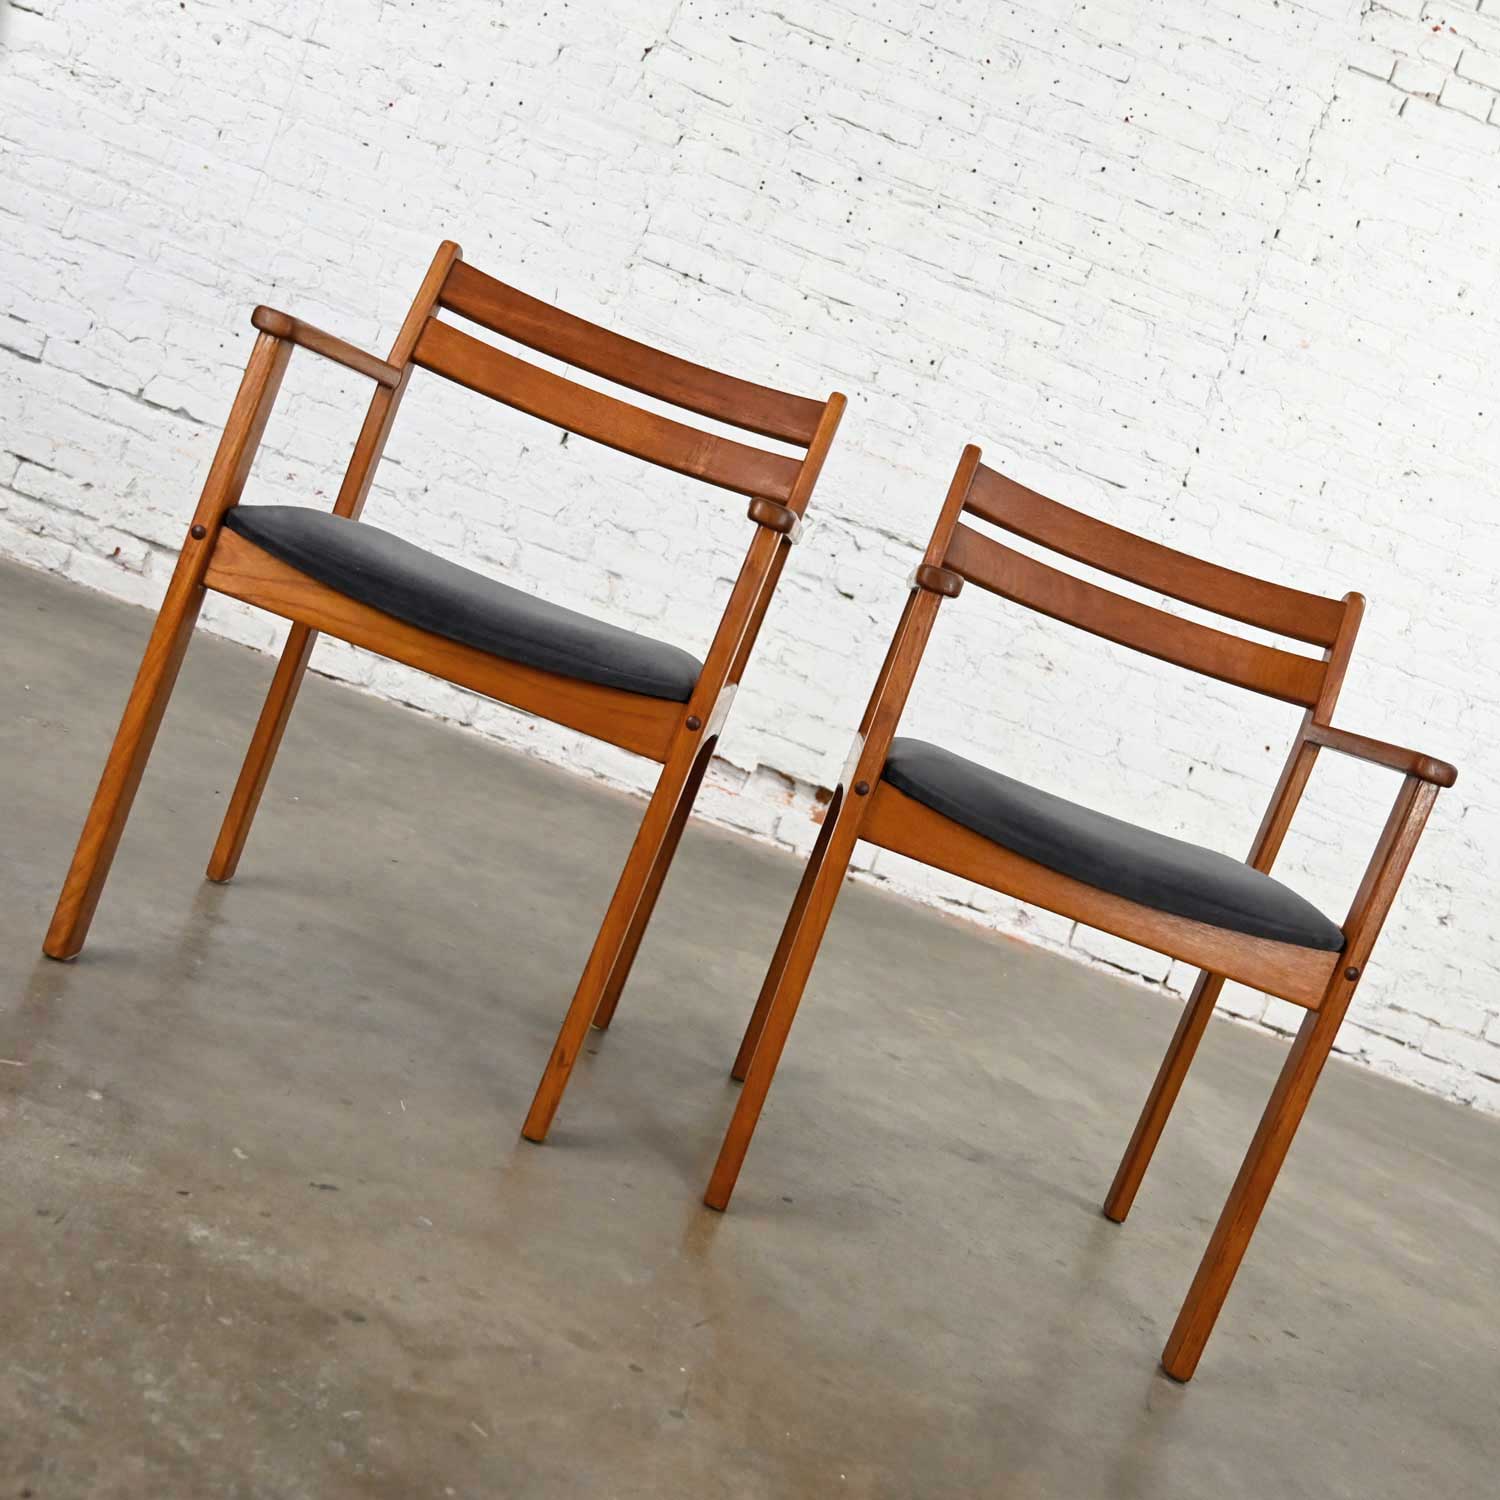 Scandinavian Modern Teak Pair of Armchairs with Brushed Charcoal Fabric Seat Cushions